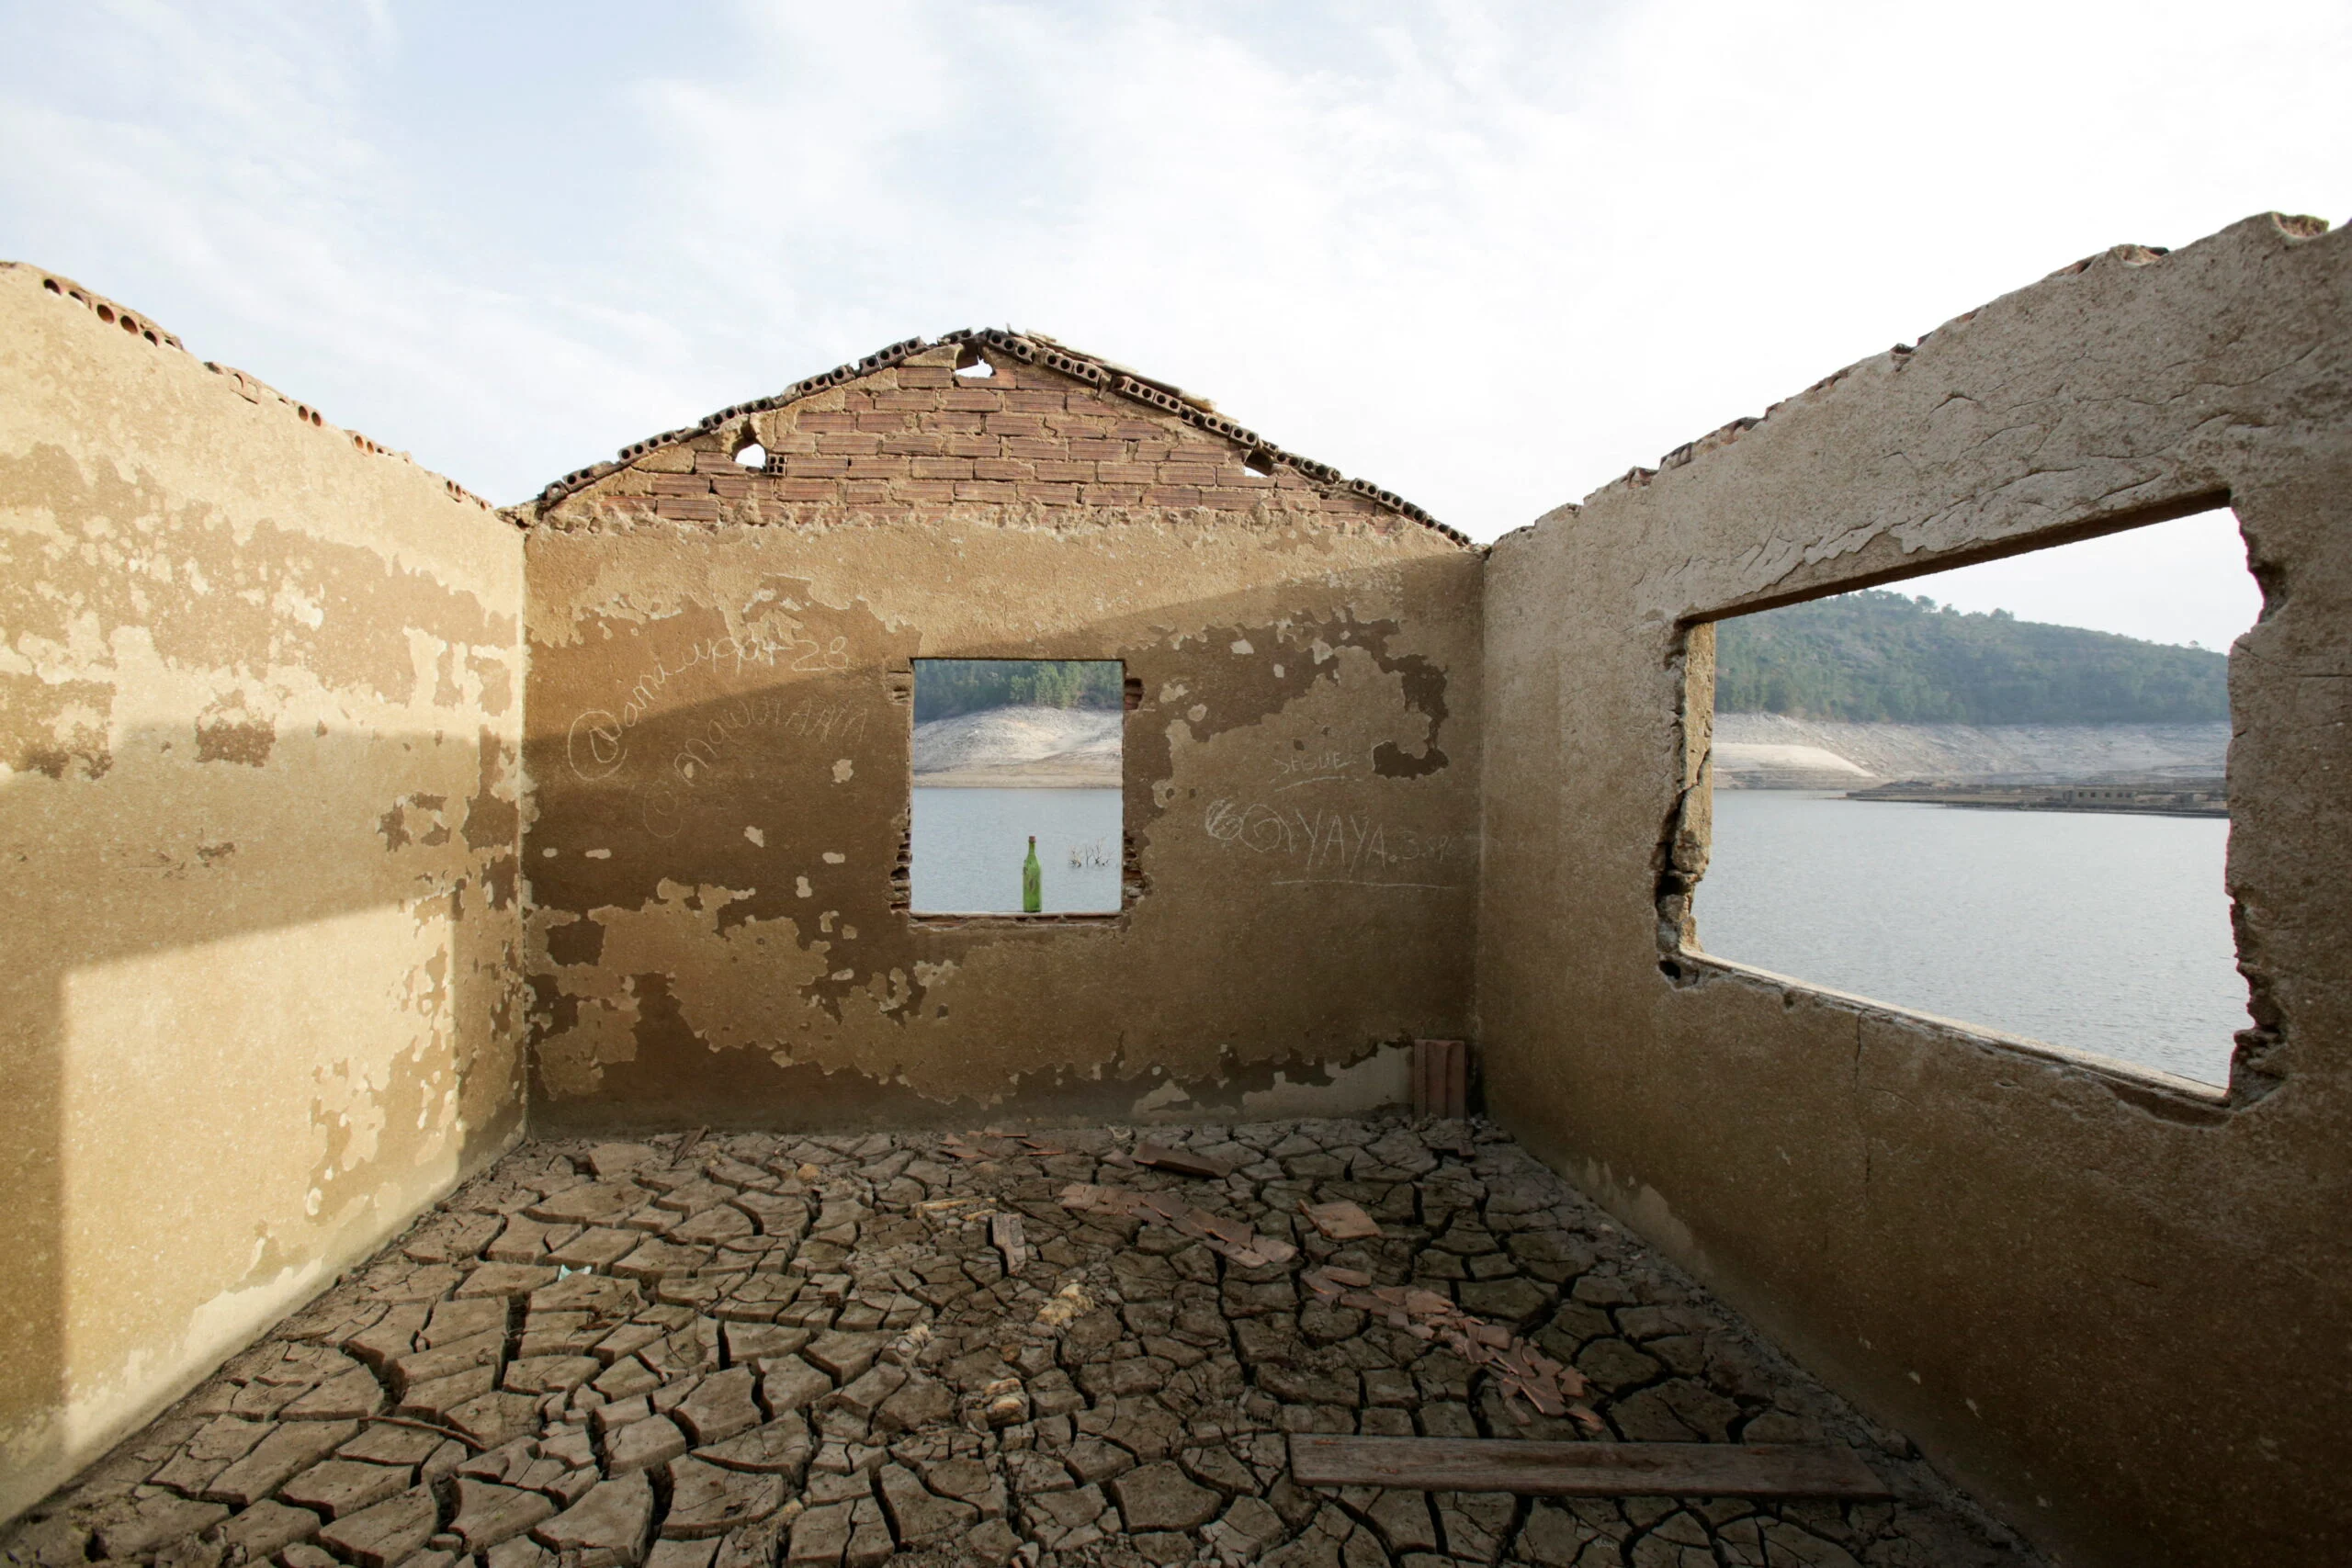 Old Spanish Town Re Emerges As Drought Dries Out Reservoir